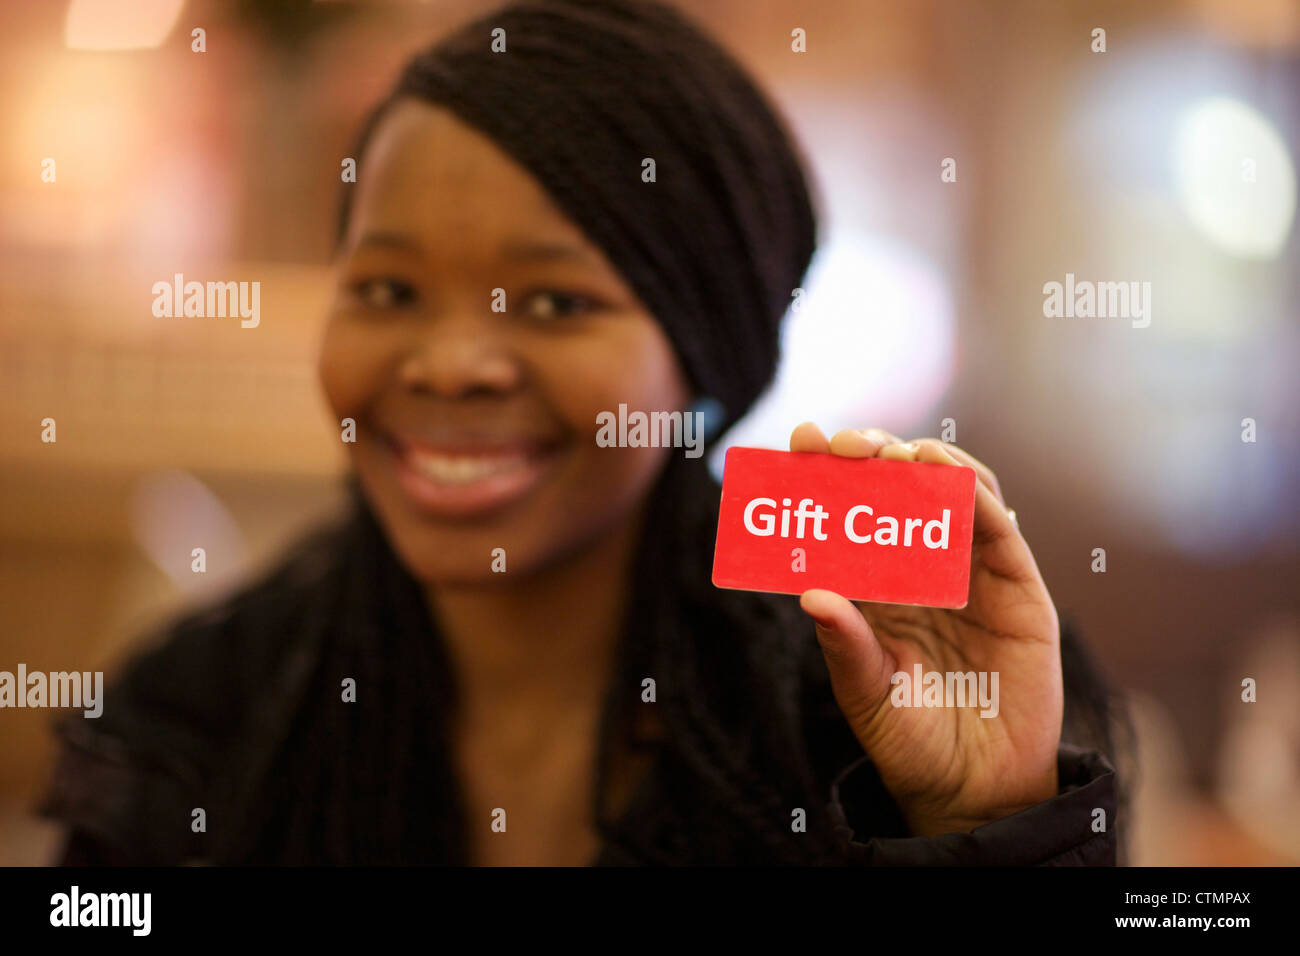 A young woman holding up a red gift card, Pietermaritzburg, KwaZulu-Natal, South Africa Stock Photo